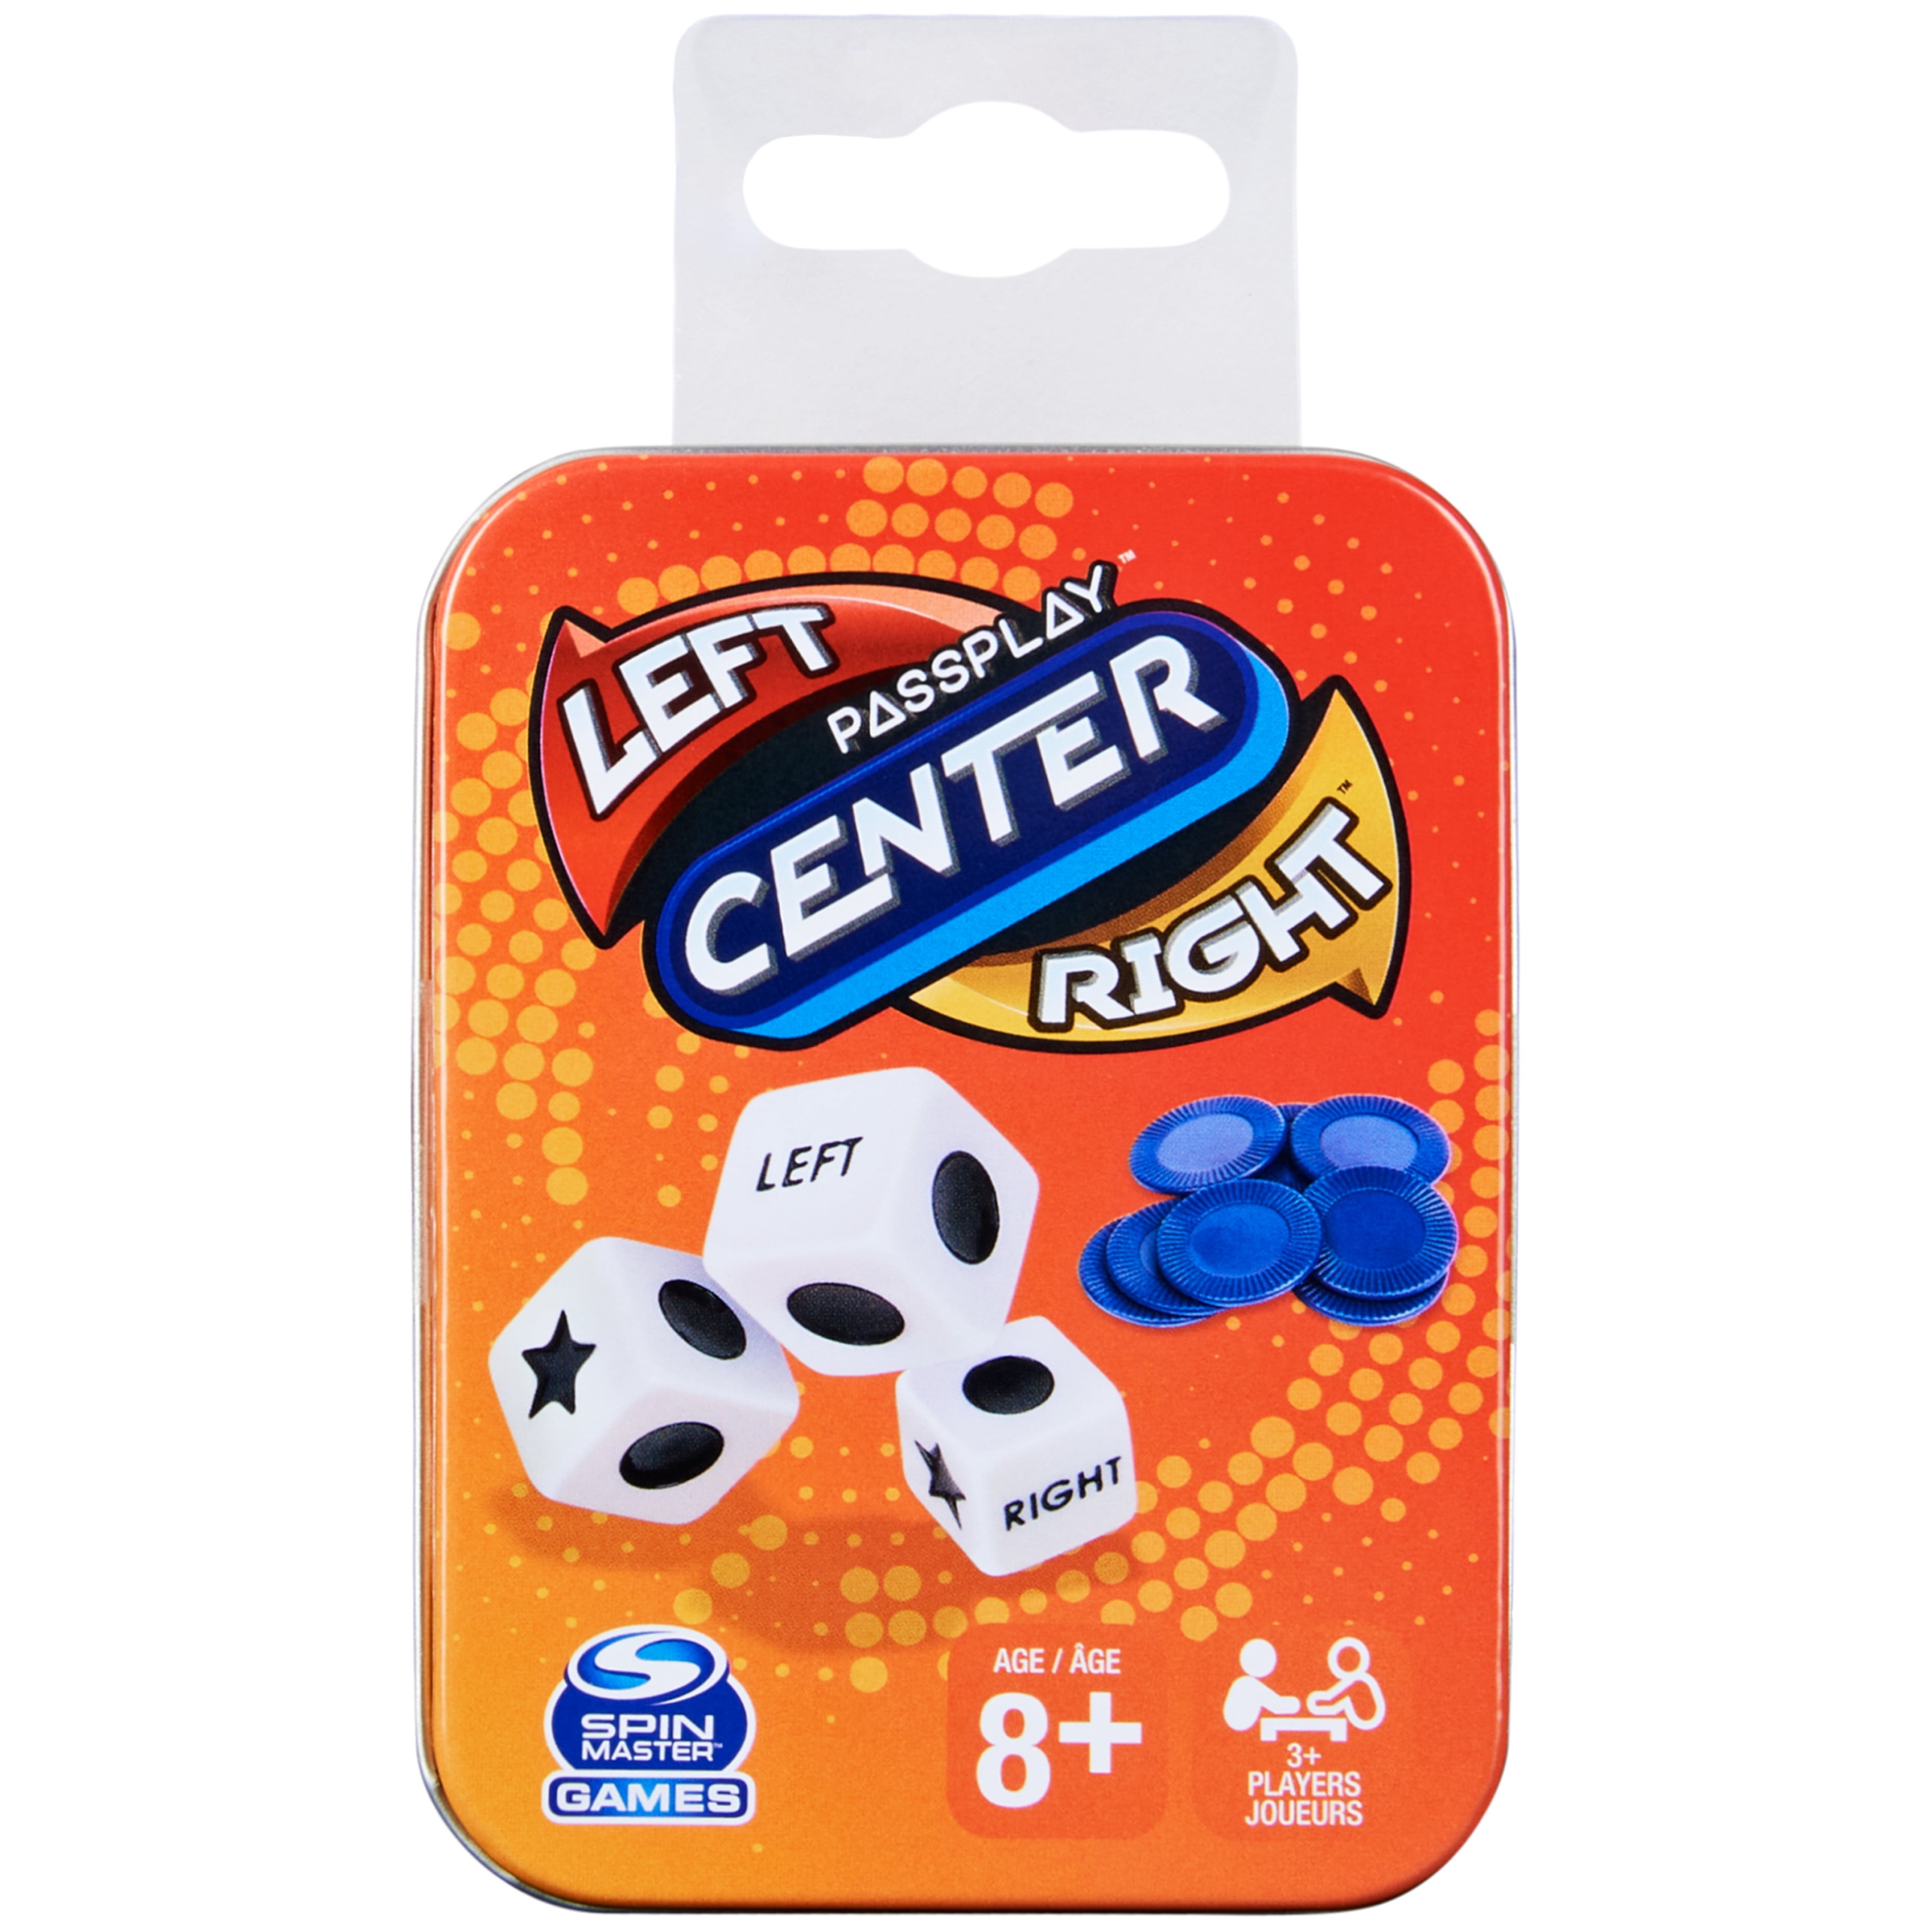 Annietfr Left Right Center Dice Game Set with 3 Dices 36 Chips Black